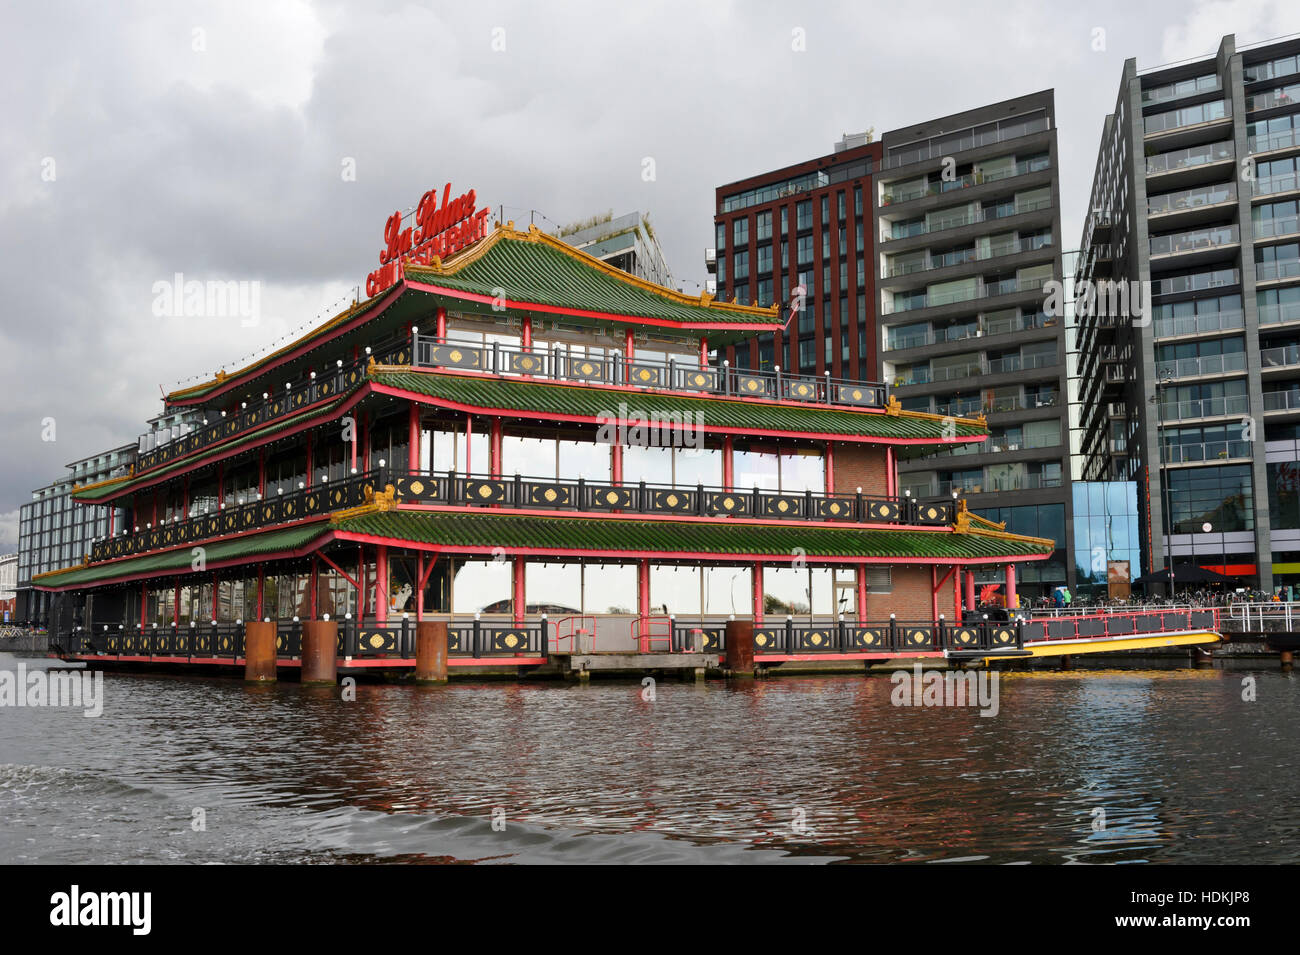 Super A floating Chinese Restaurant In Amsterdam, Holland, Netherlands VY-95